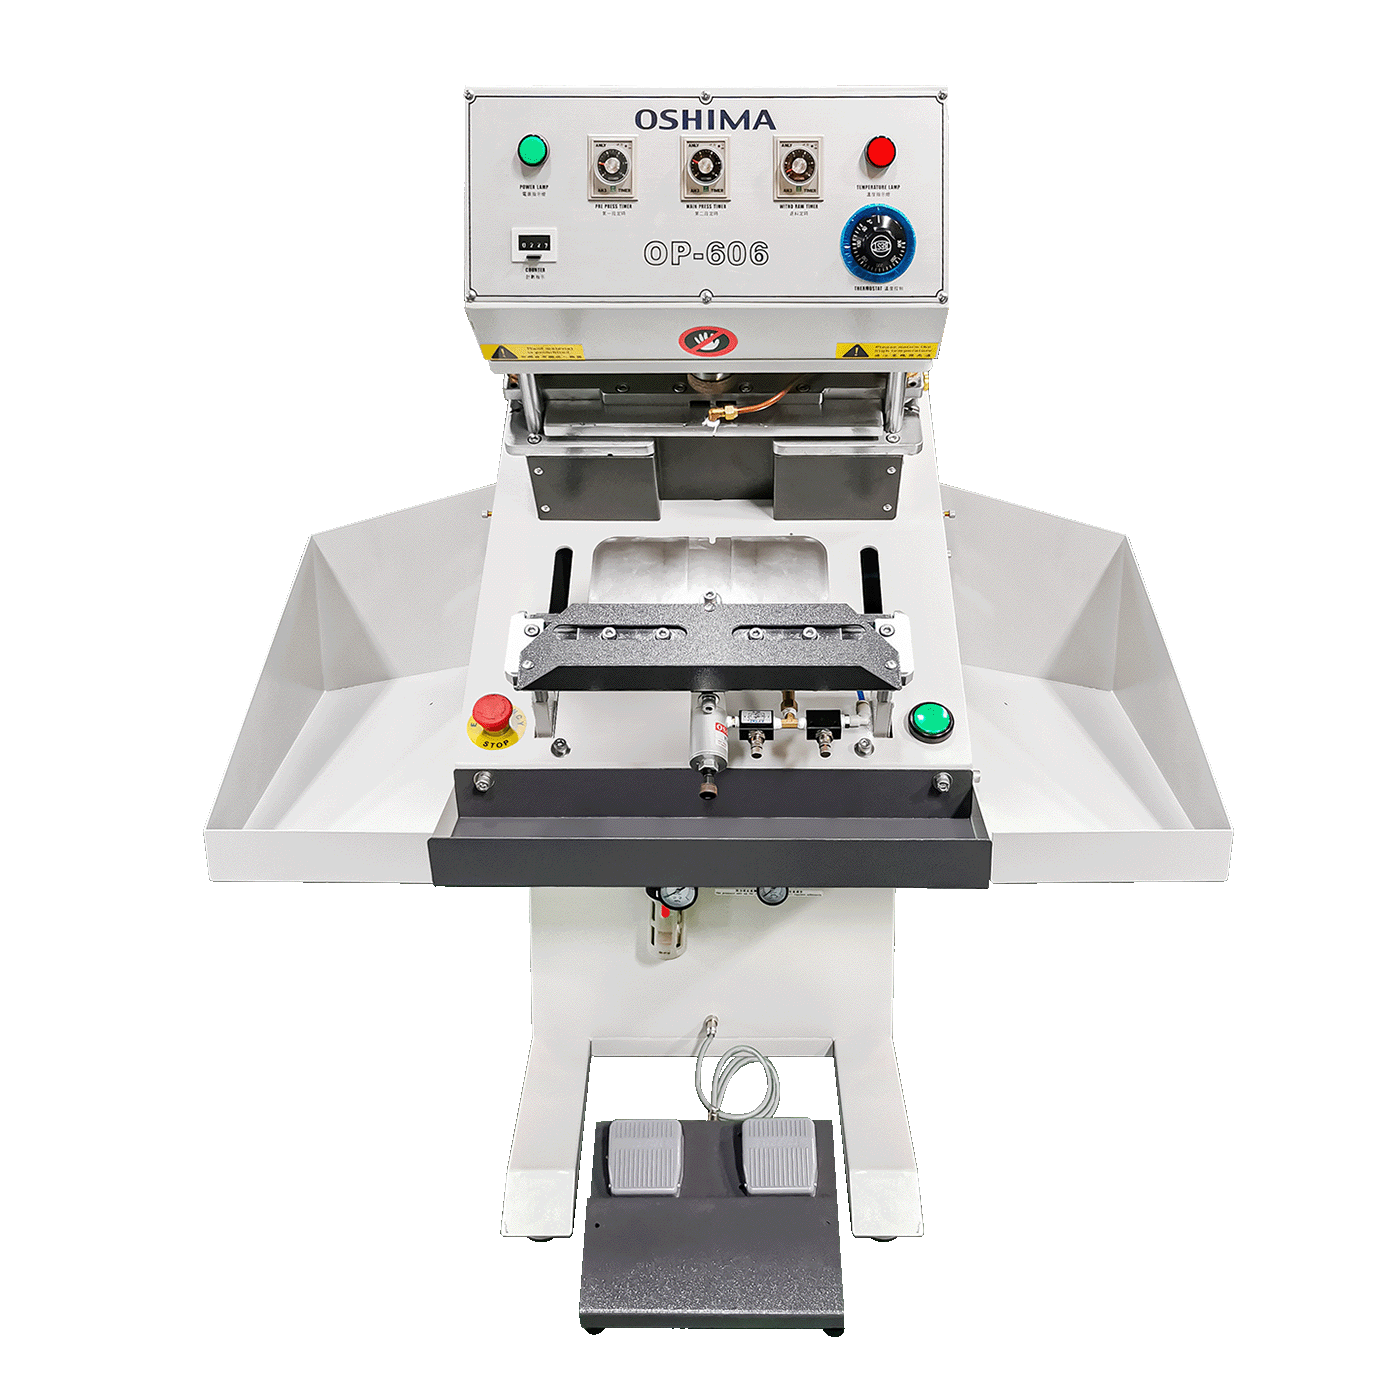 https://www.oshima.com.tw/archive/image/product1/images/OSHIMA-GarmentMachinery-CuffShaping-OP606-1400x1400.png